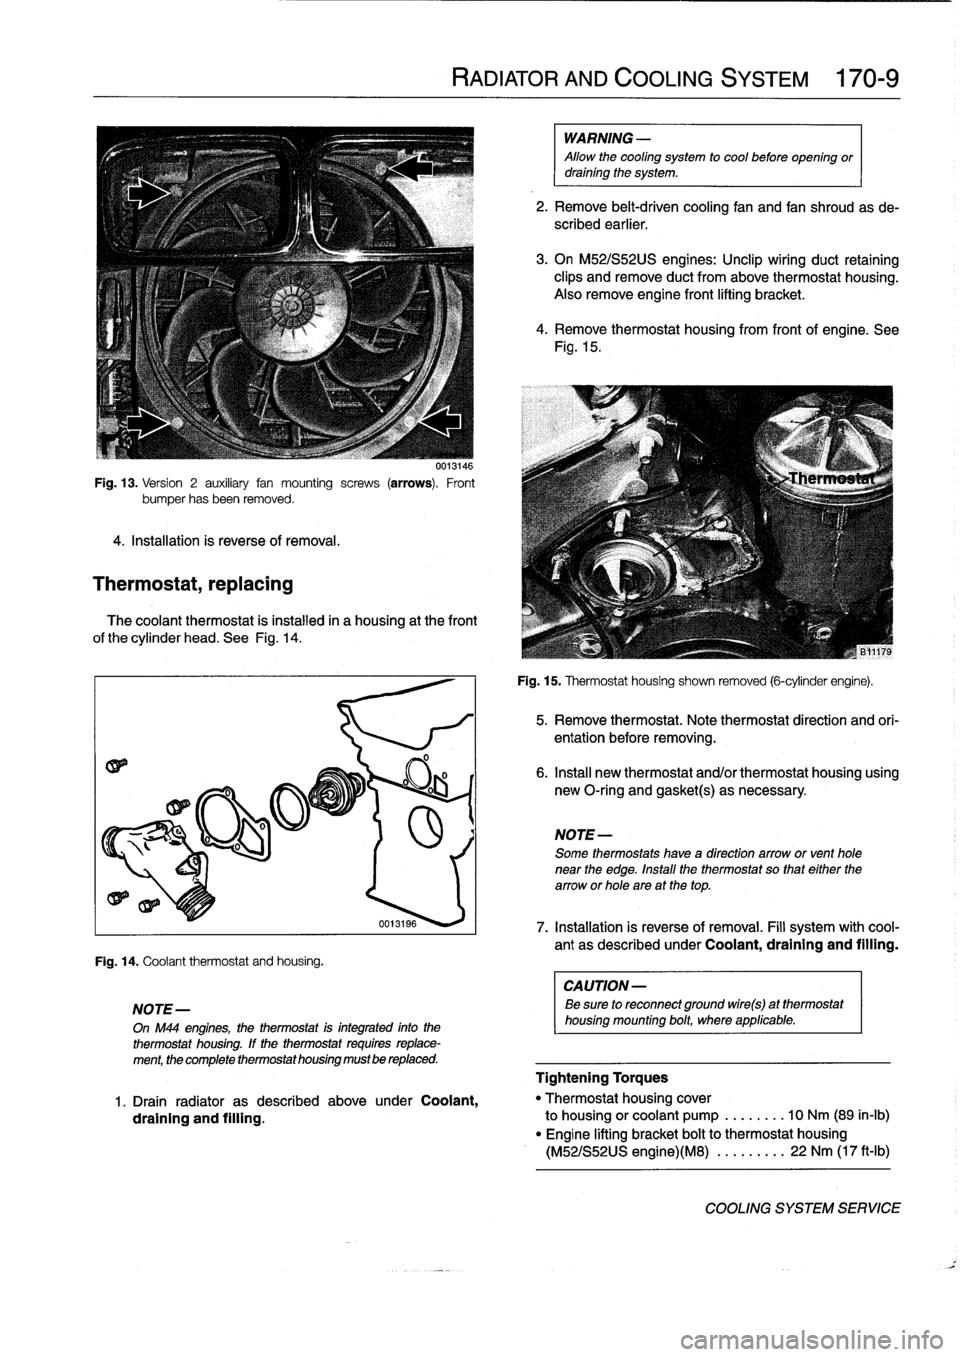 BMW 328i 1995 E36 Workshop Manual 
Fig
.
13
.
Version
2
auxiliary
fan
mounting
screws
(arrows)
.
Front
bumper
hasbeen
removed
.

4
.
Installation
is
reverse
of
removal
.

Thermostat,
replacing

0013146

The
coolant
thermostat
is
insta